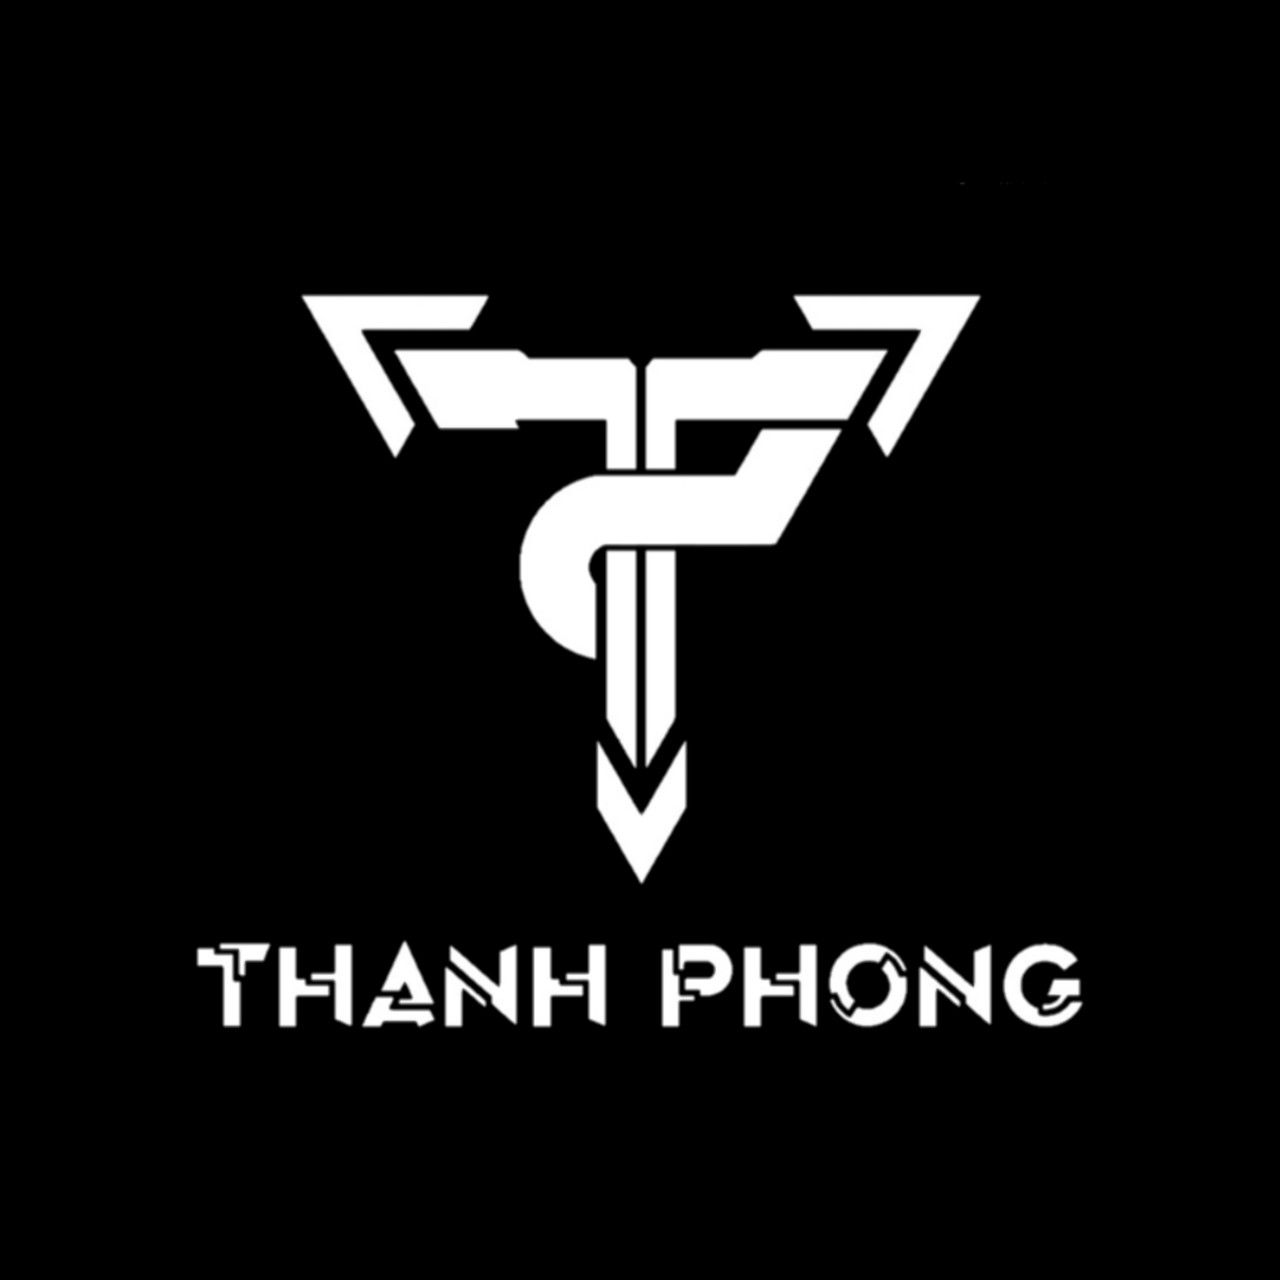 Download Waiting For Thanh Phong